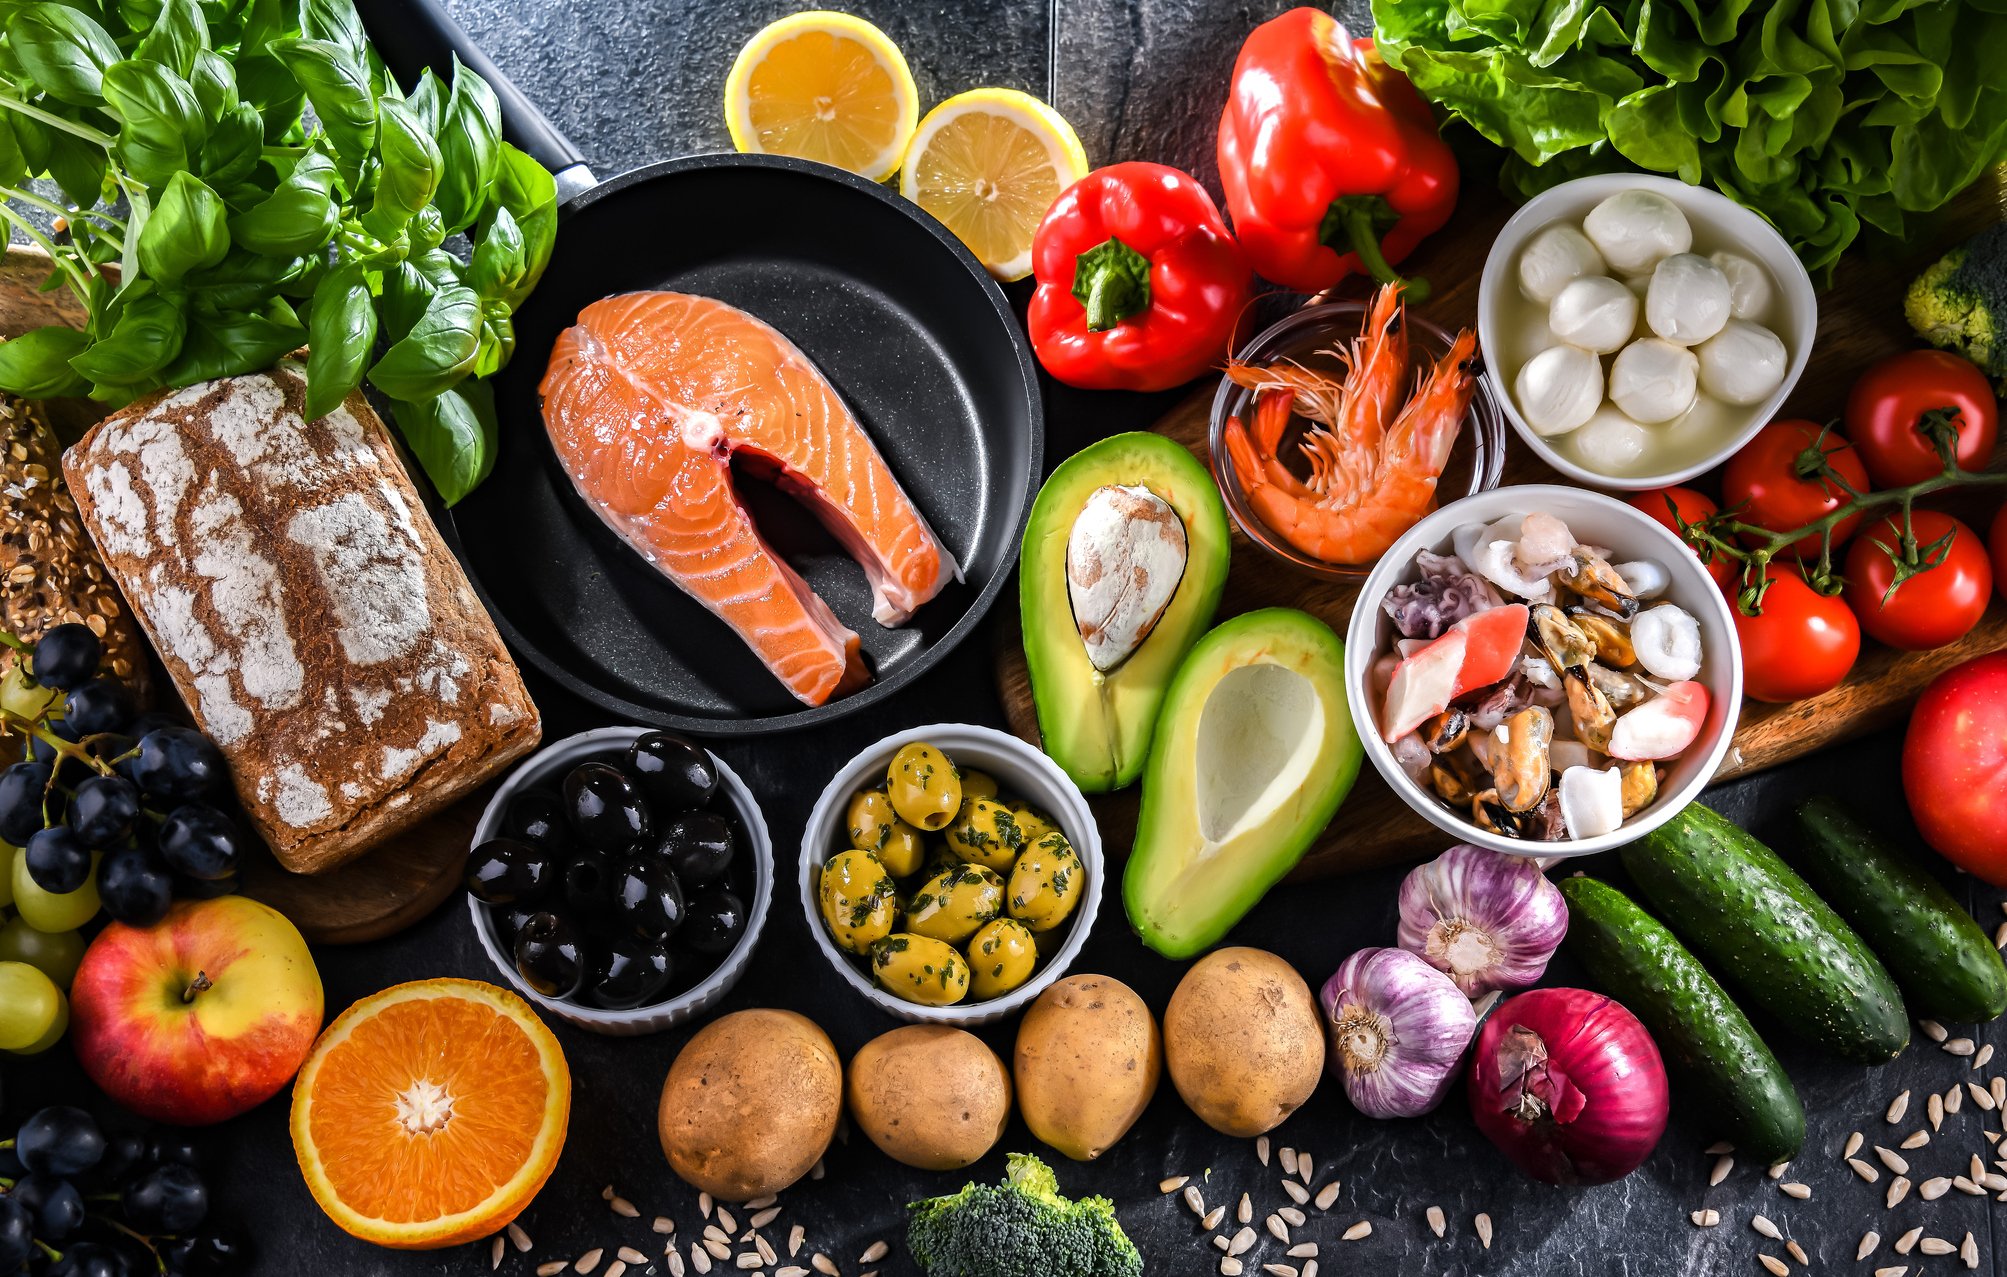 The mediterranean diet is associated with higher cardio fitness level